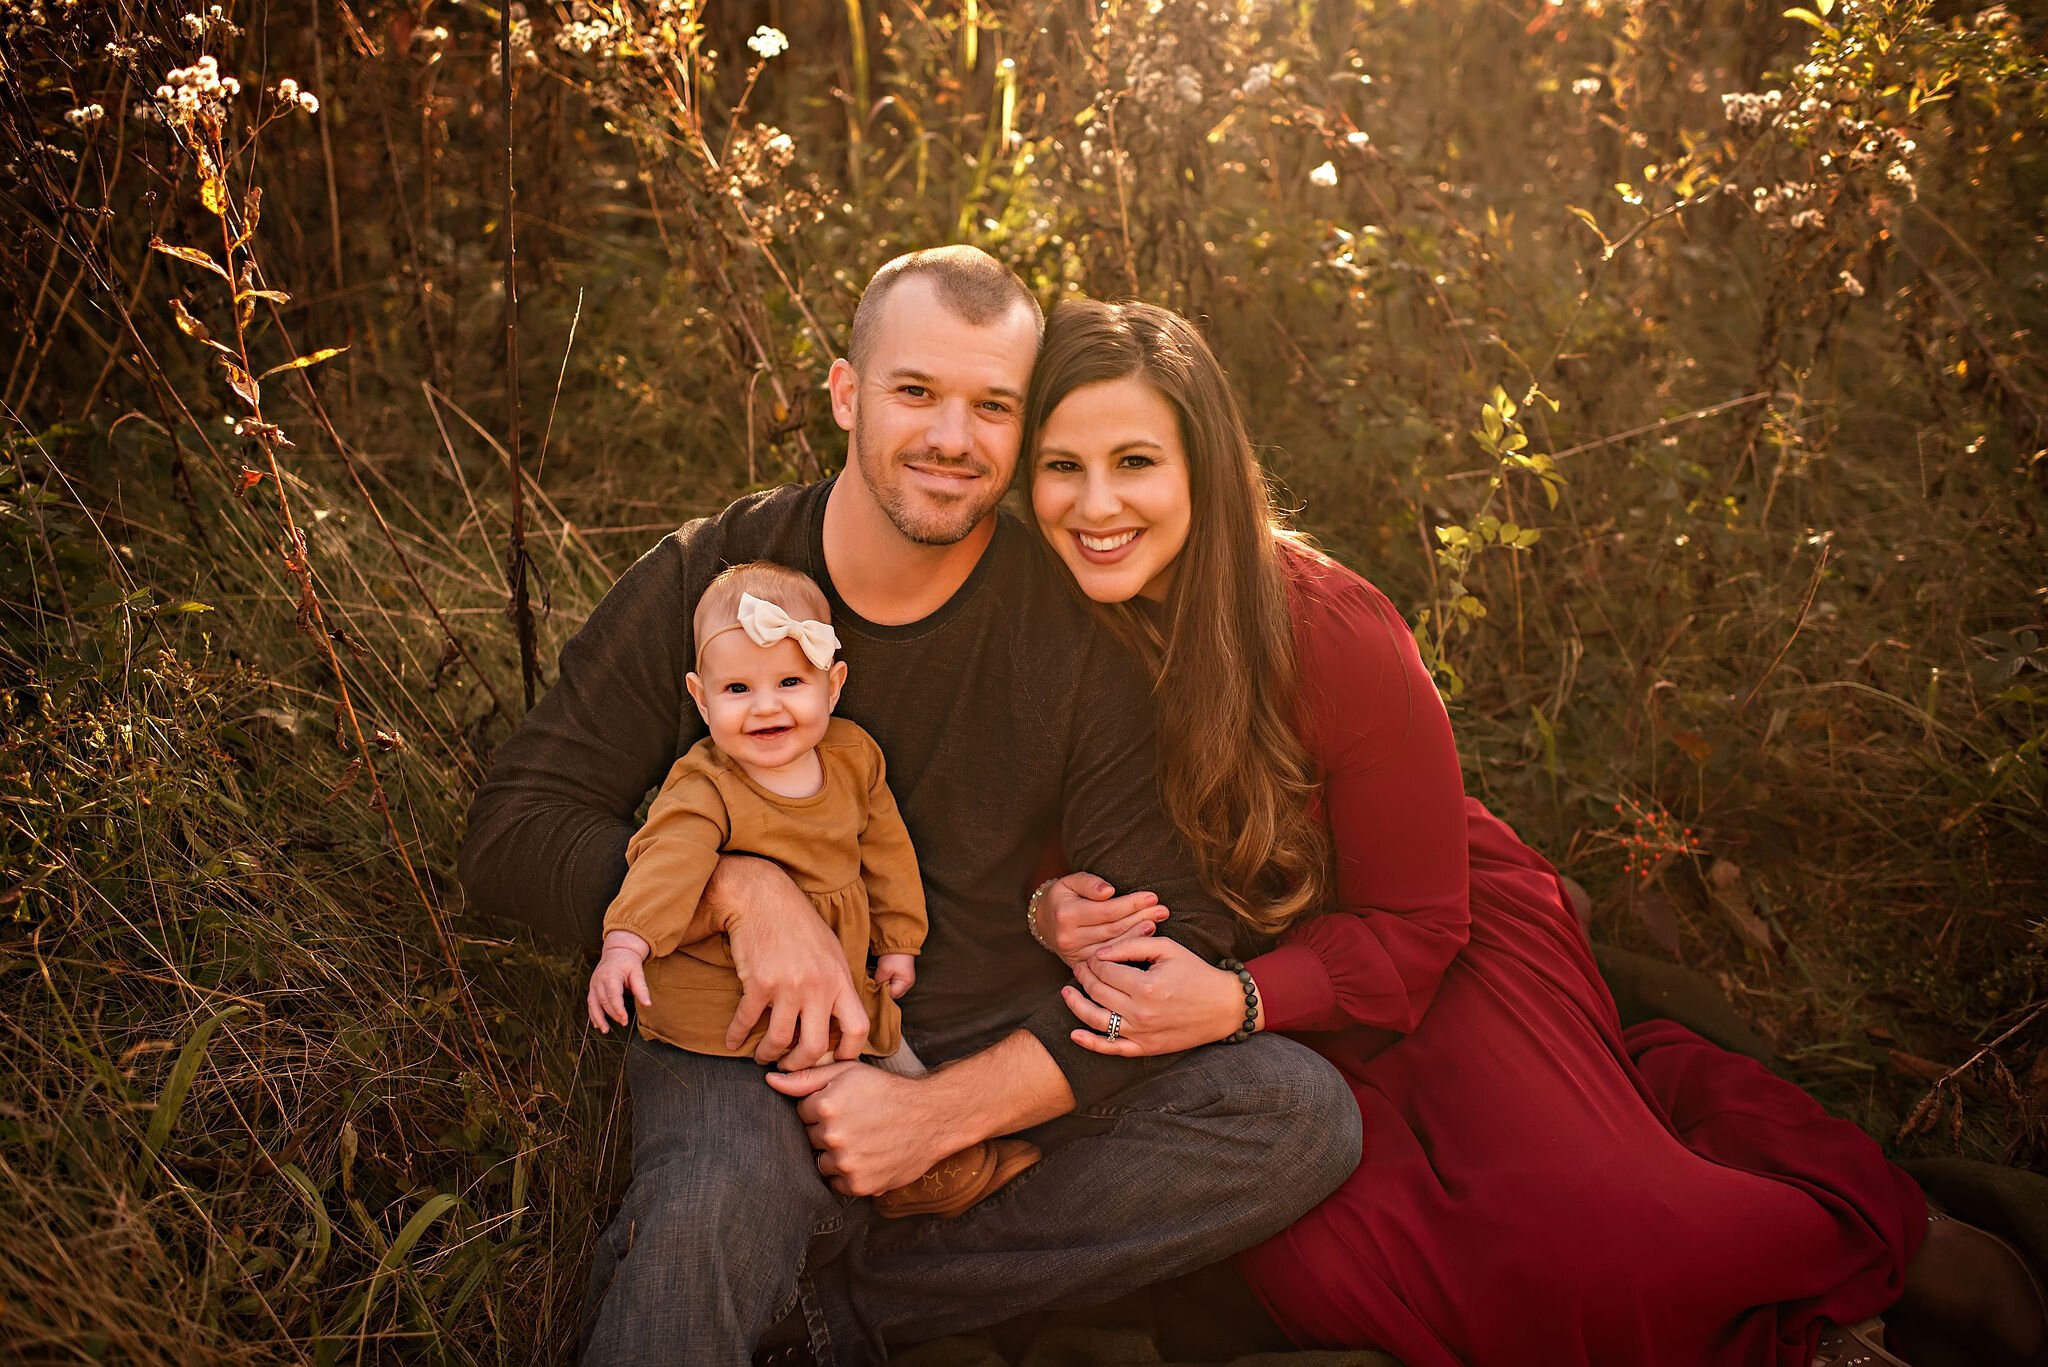 cleveland-ohio-fall-family-photo-session-outdoors-lauren-grayson-photography.jpeg